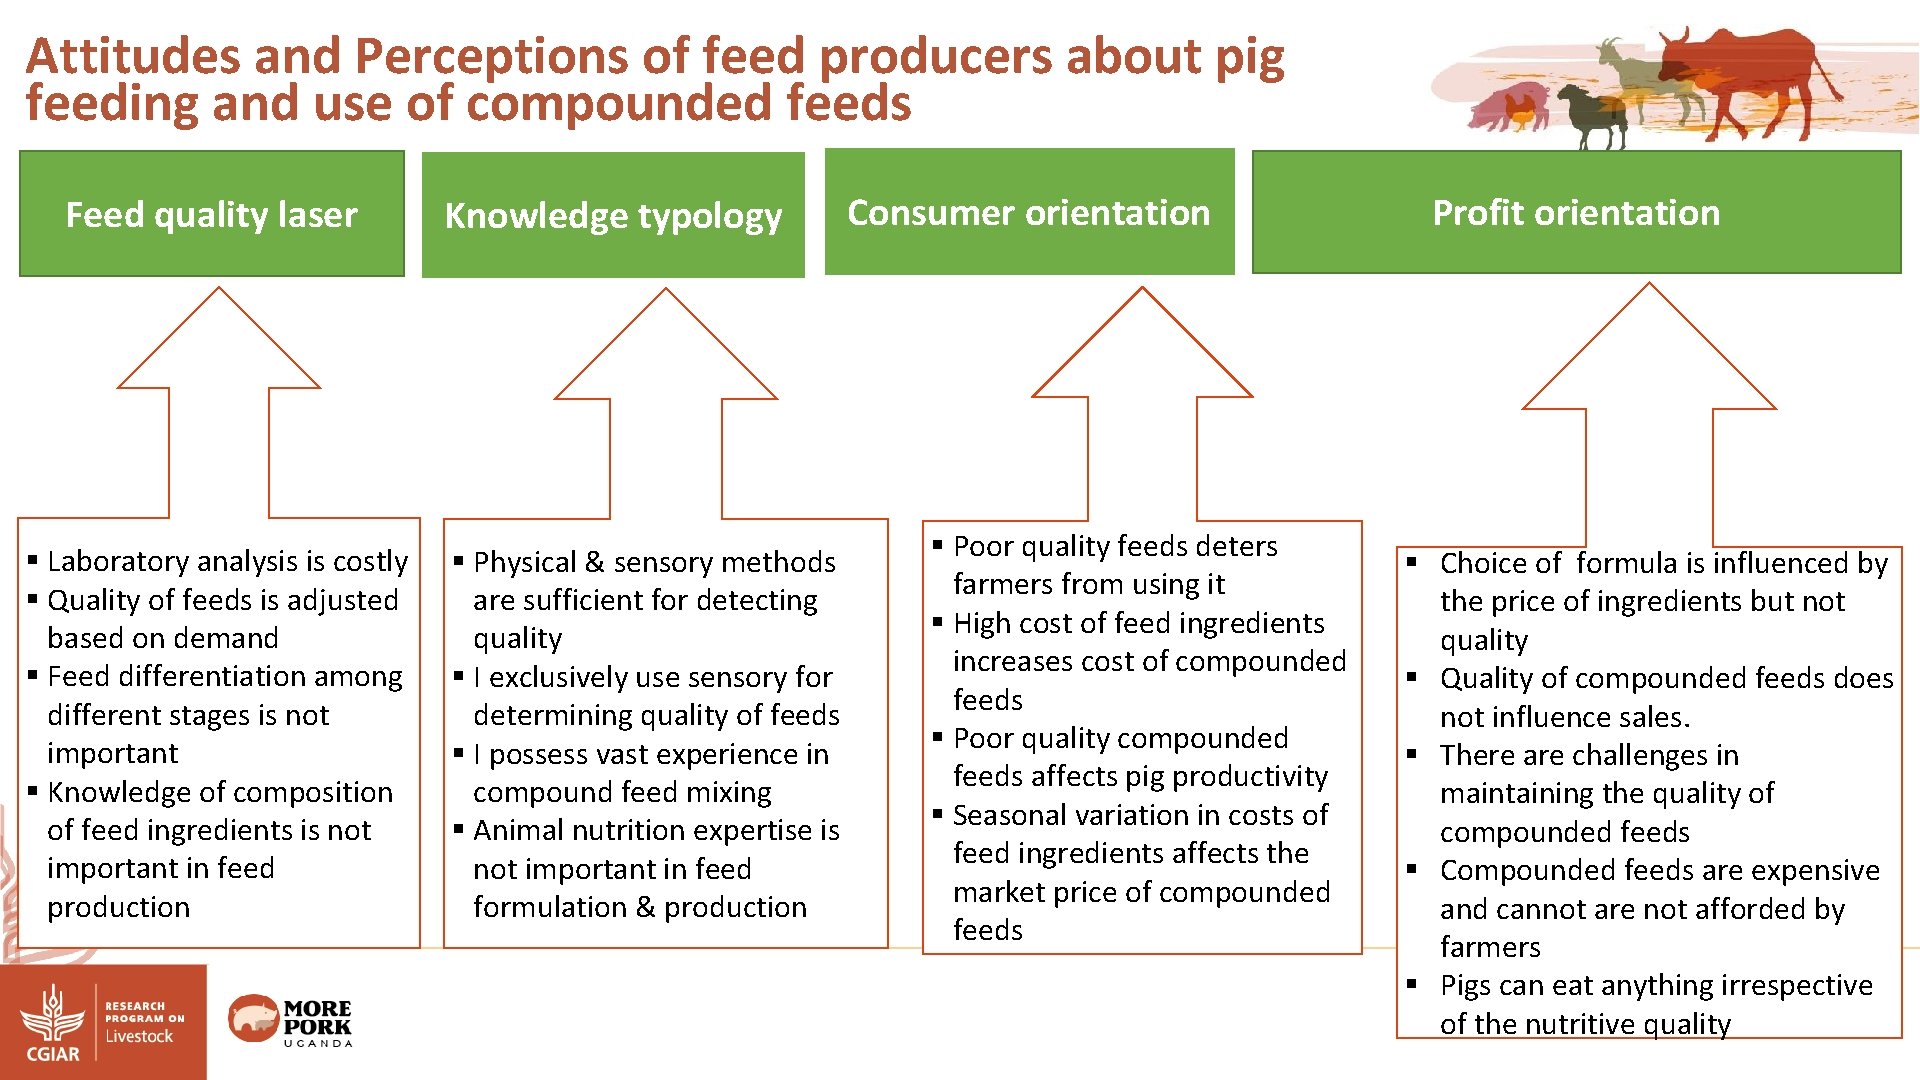 Attitudes and Perceptions of feed producers about pig feeding and use of compounded feeds